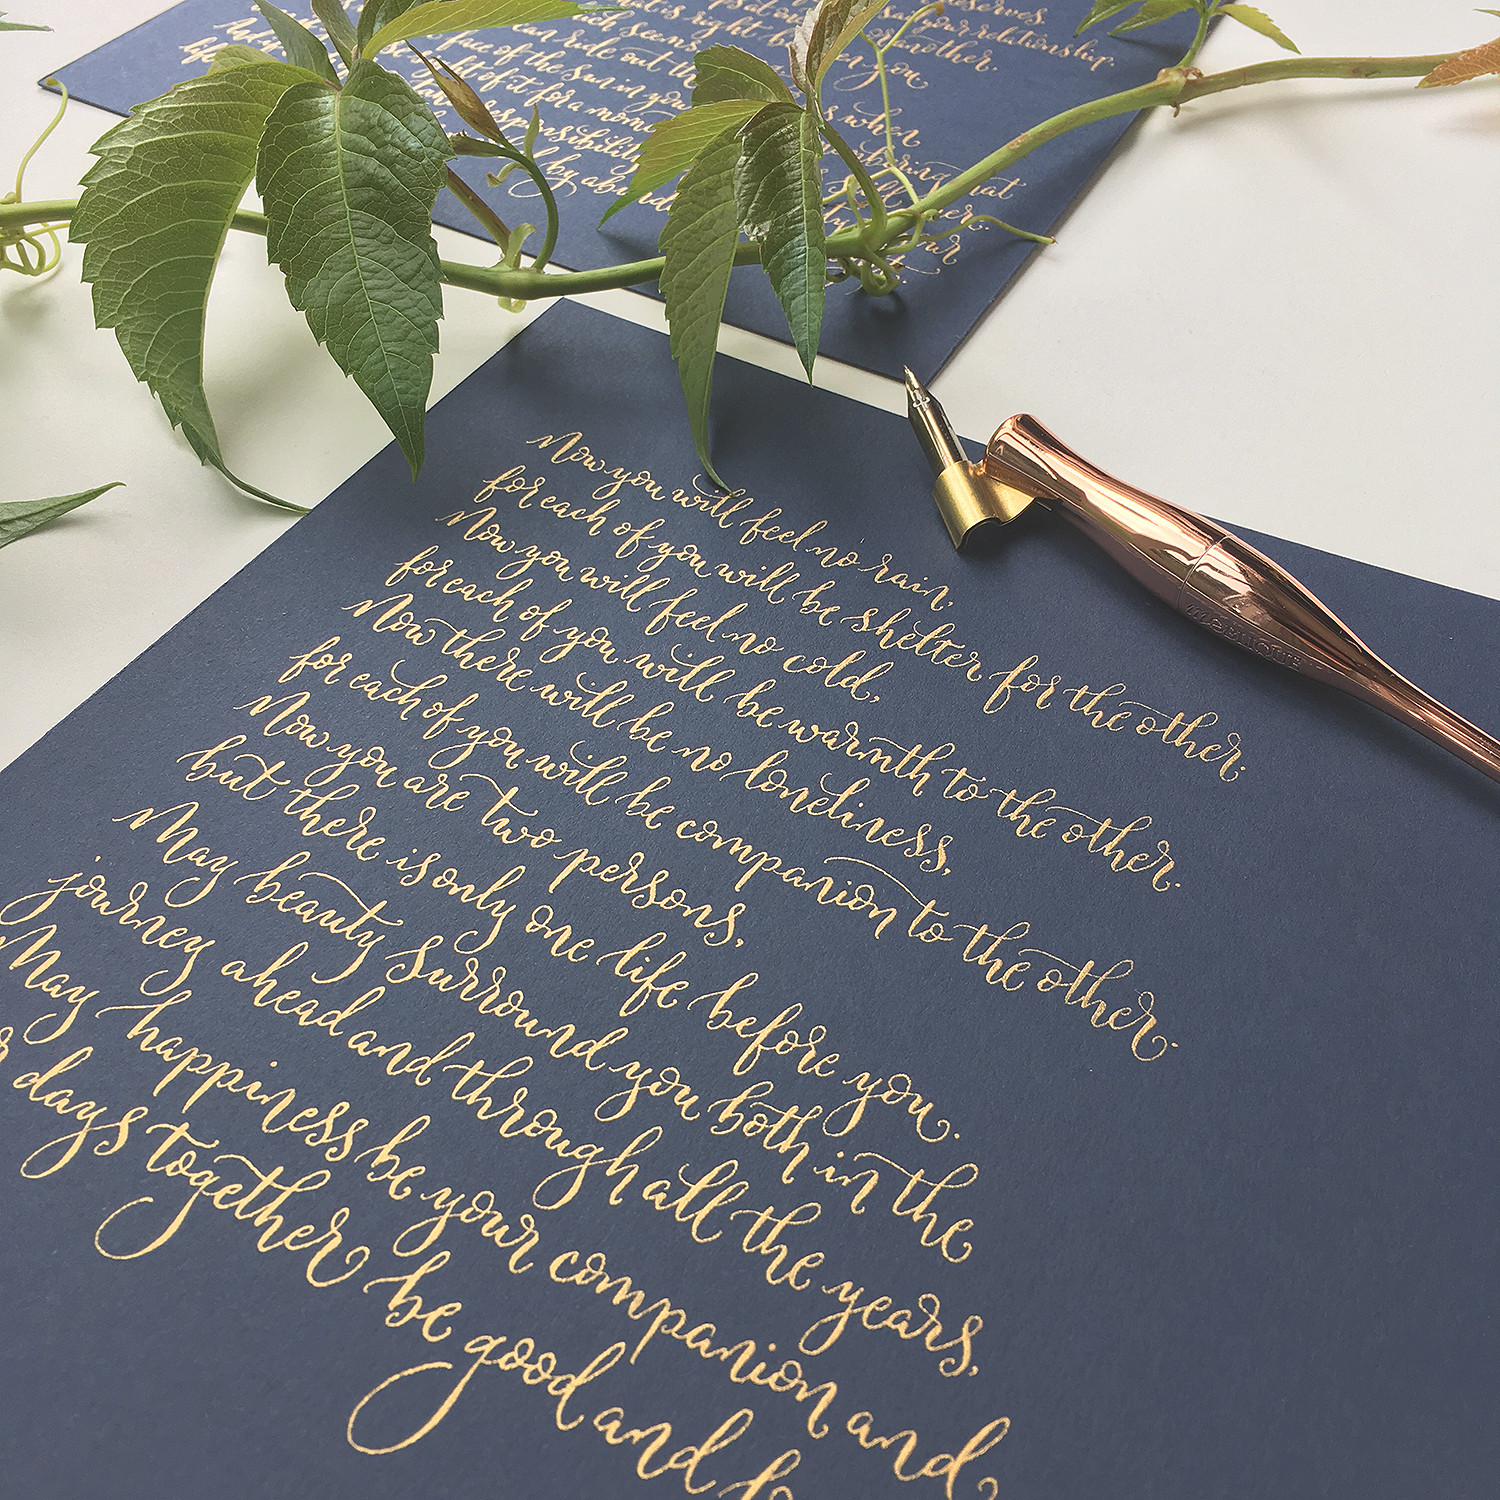 Gold upright modern calligraphy on a navy blue background - Apache Wedding Blessing